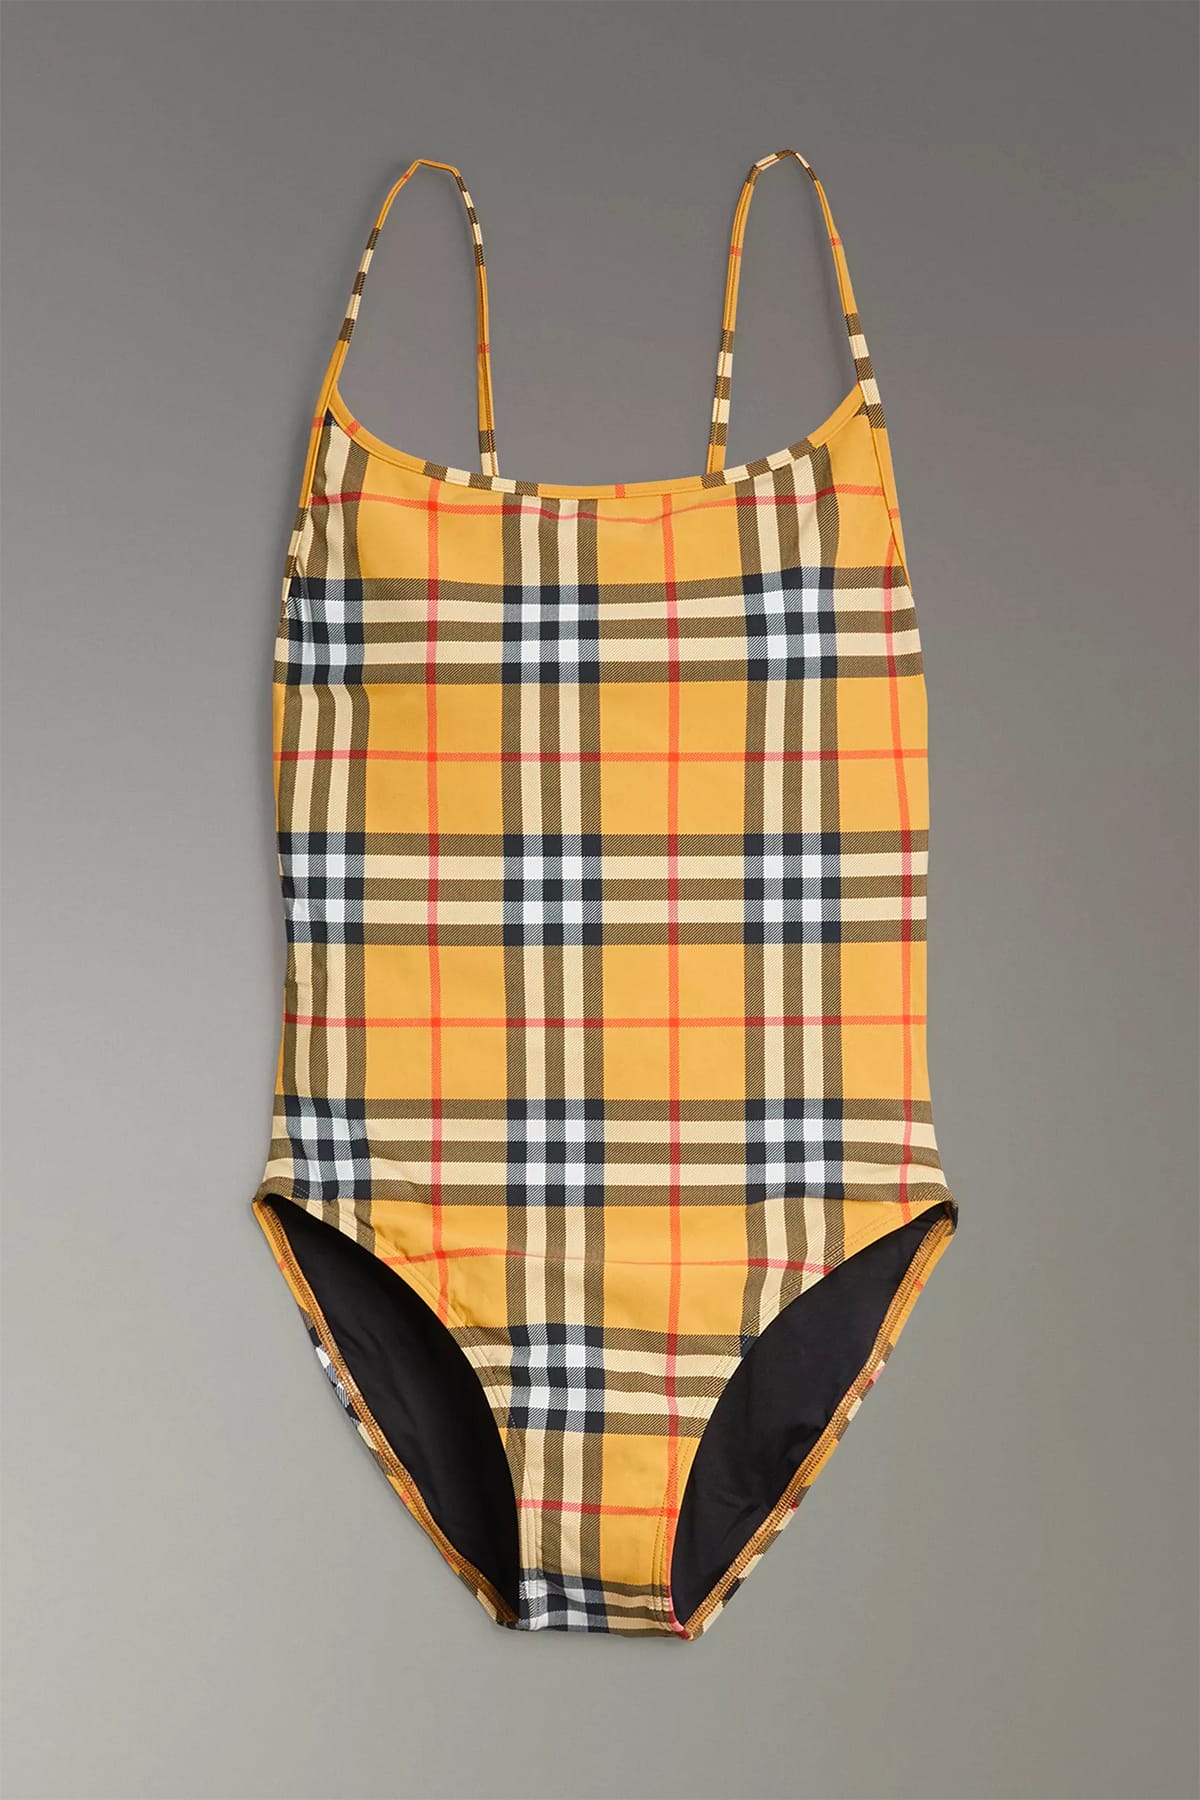 burberry vintage check swimsuit